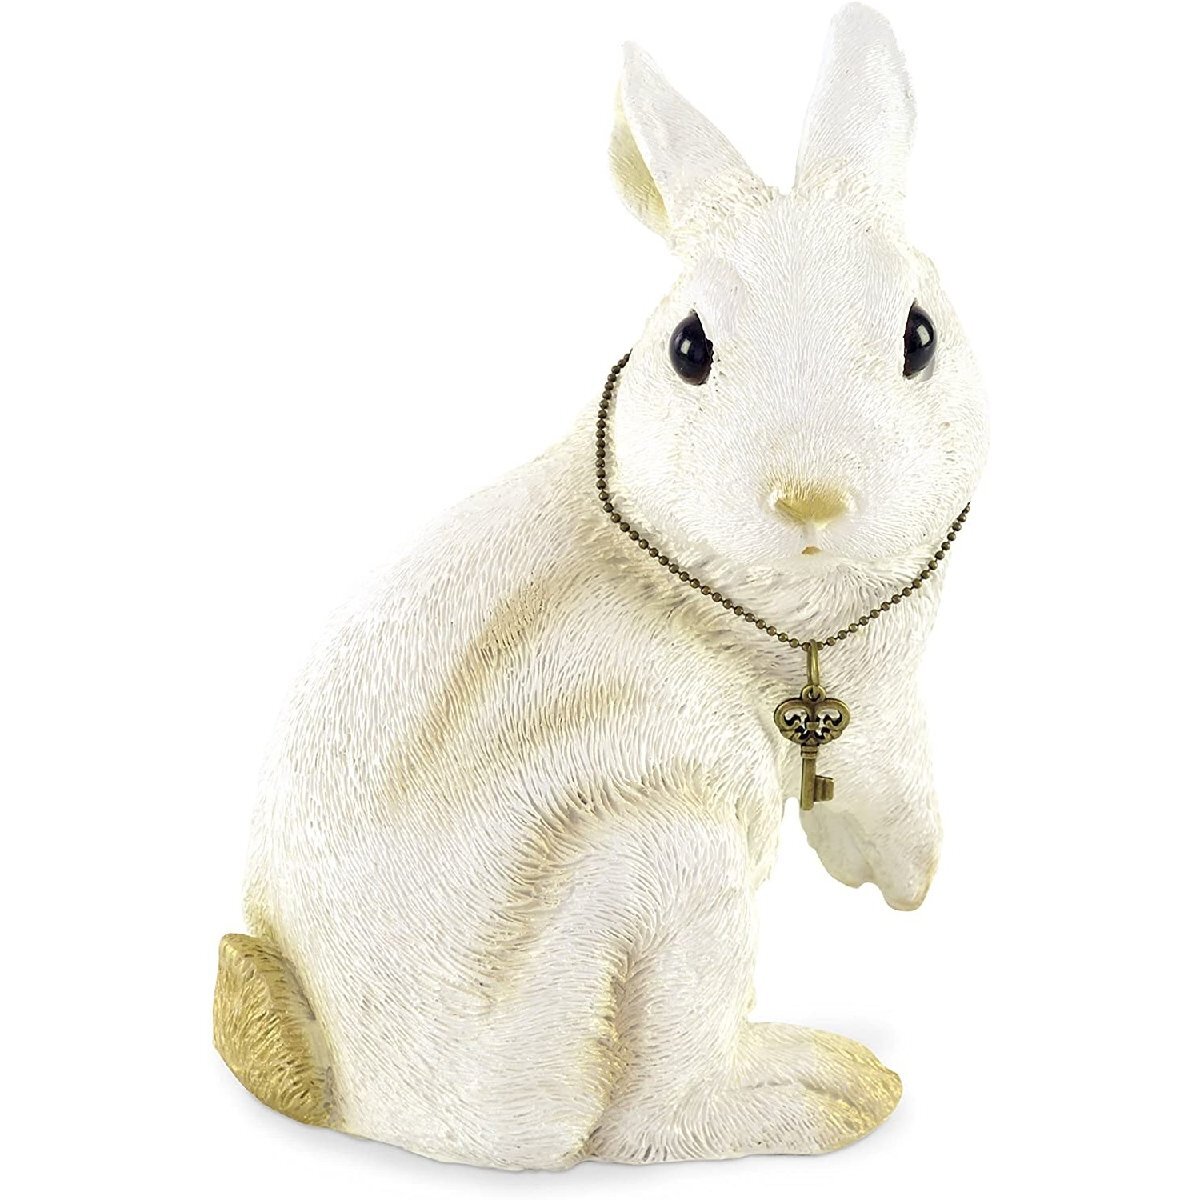 A cute, round shape piggy bank object, rabbit, 12.5 x 10 x 17.5 cm, realistic texture, and a cute gaze as it gazing at the keys hanging from it, Handmade items, interior, miscellaneous goods, ornament, object